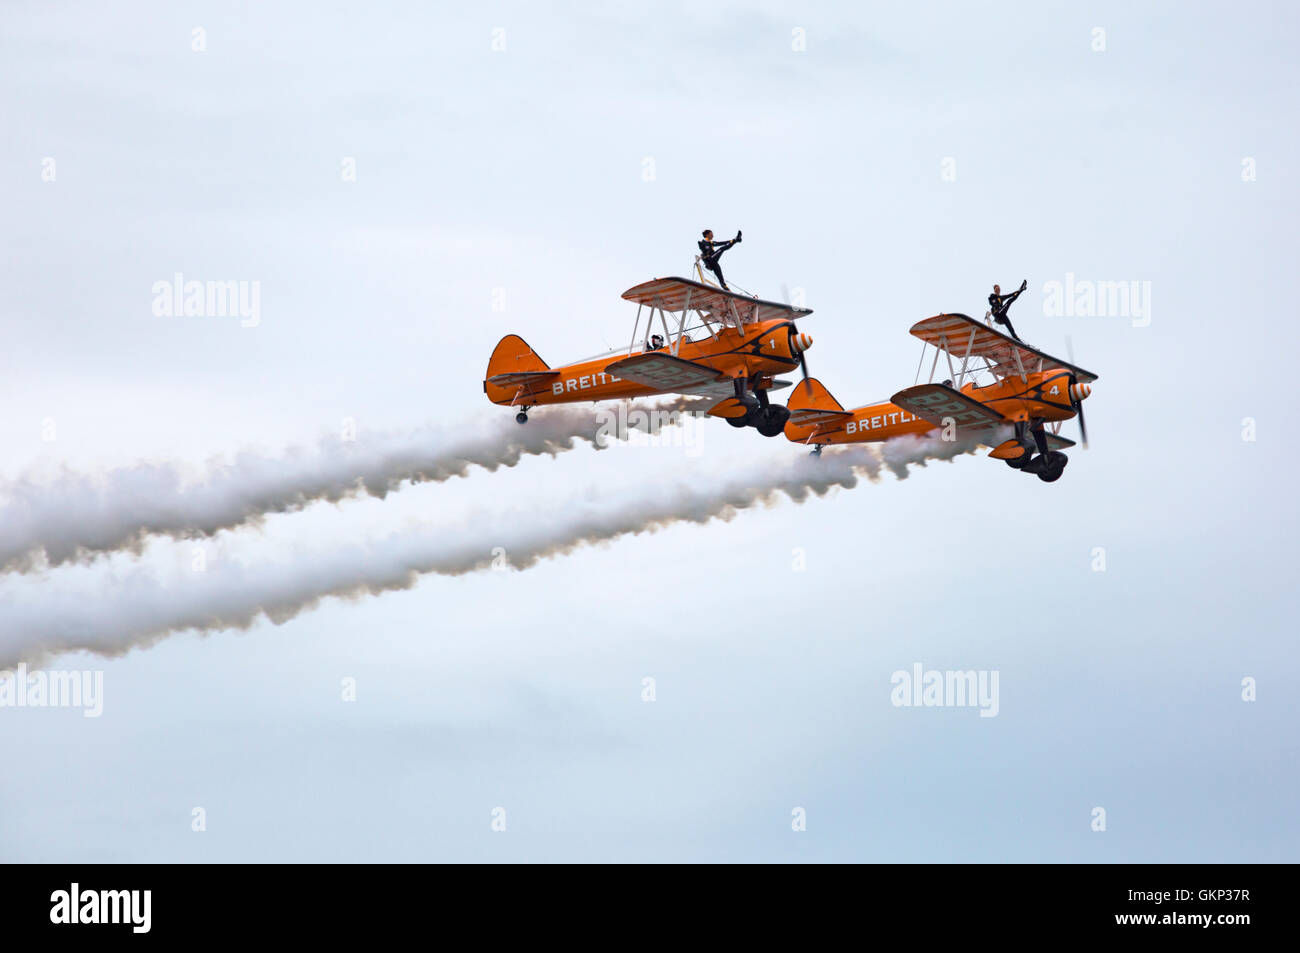 Bournemouth, UK. 21 Aug, 2016. Breitling wingwalkers wing walkers perform at the Bournemouth Air Festival, Bournemouth, UK. The Breitling wingwalkers  have since become the AeroSuperBatics Wingwalkers.  Credit:  Carolyn Jenkins/Alamy Live News Stock Photo